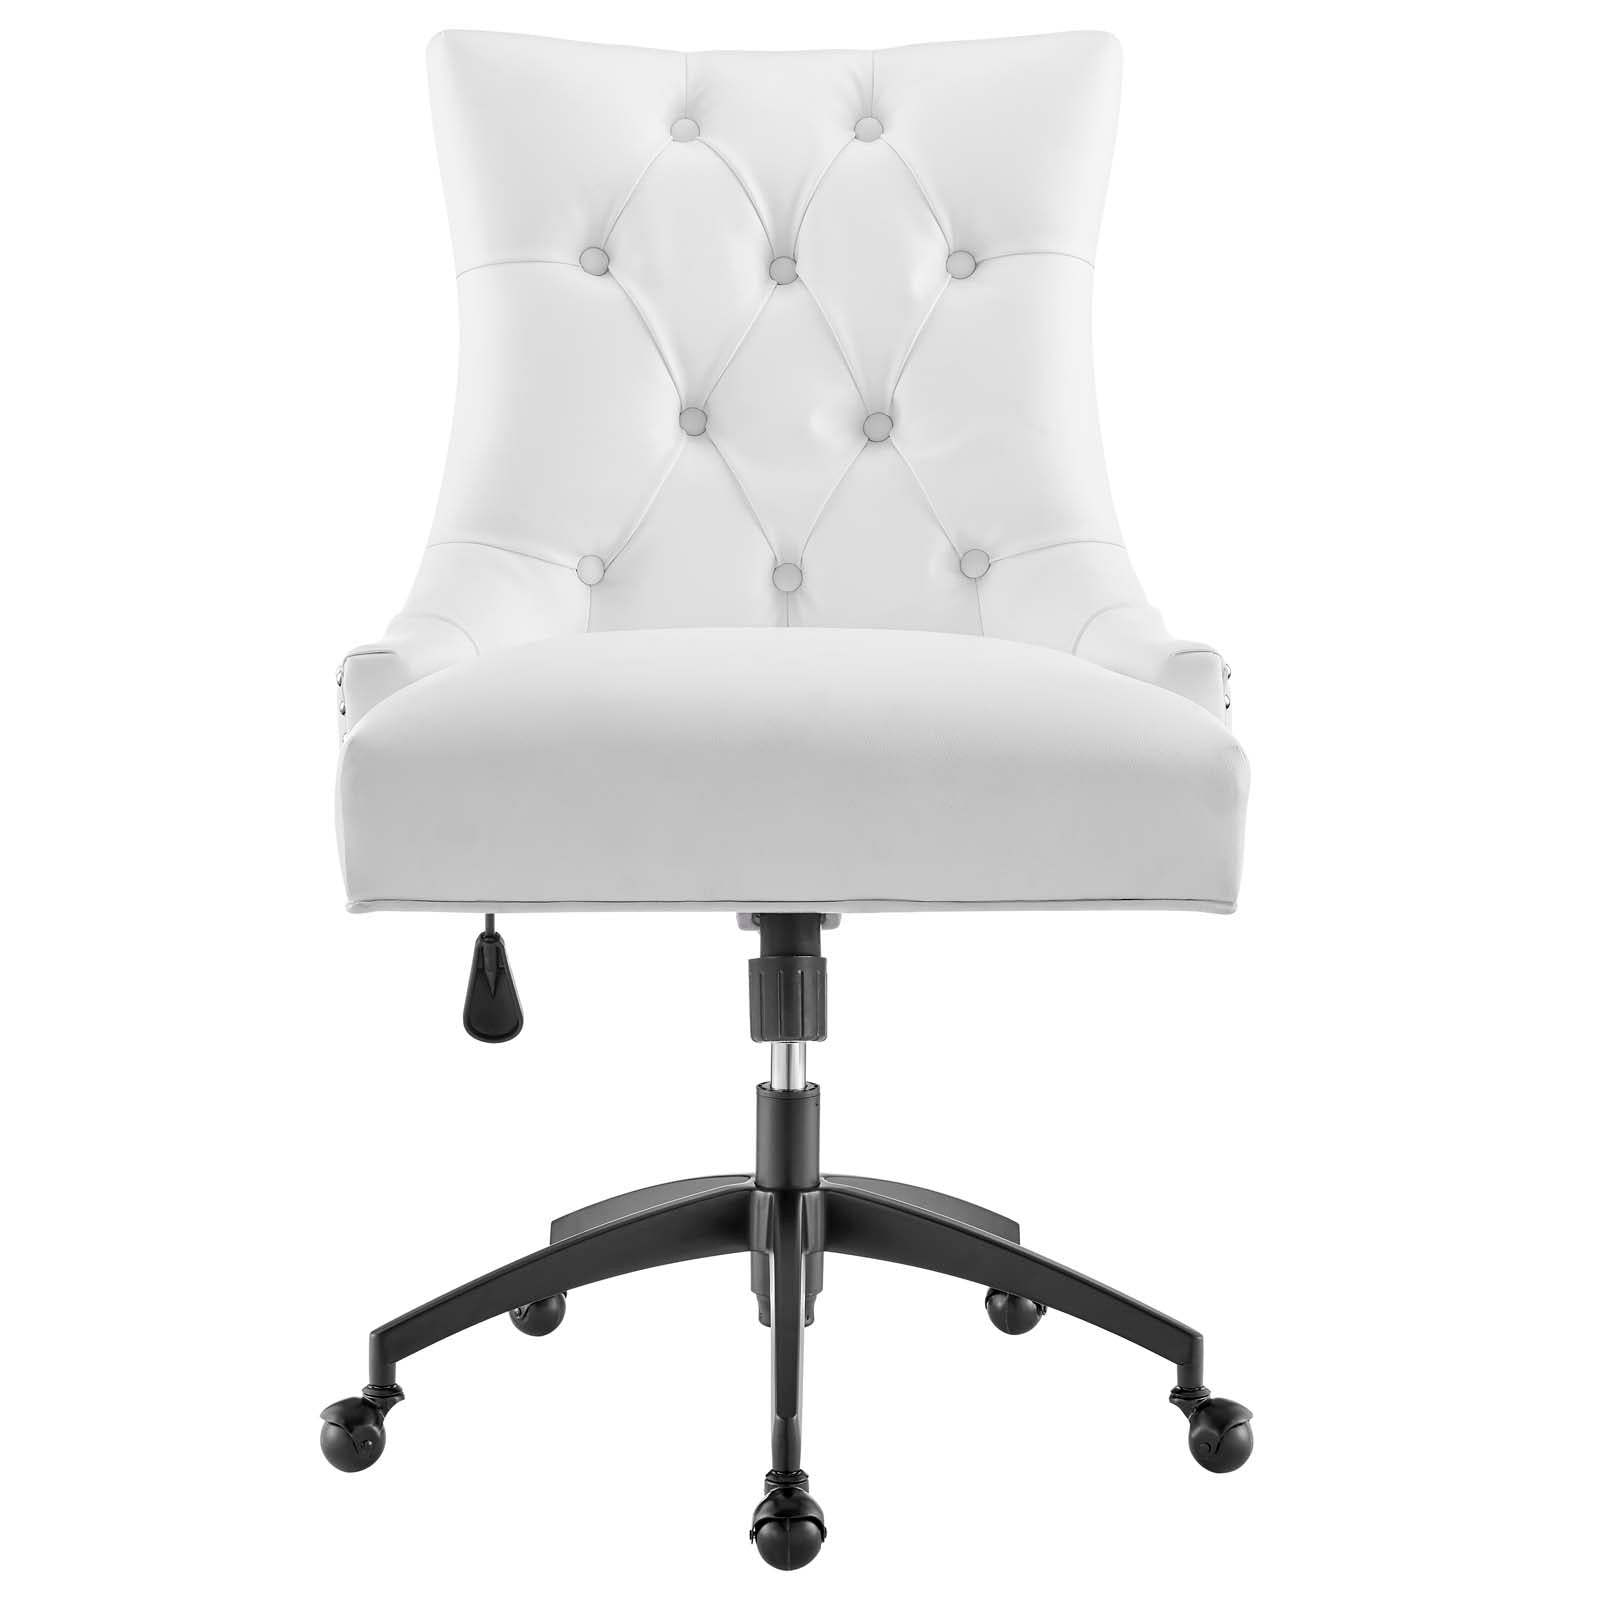 Modway Task Chairs - Regent Tufted Vegan Leather Office Chair Black White